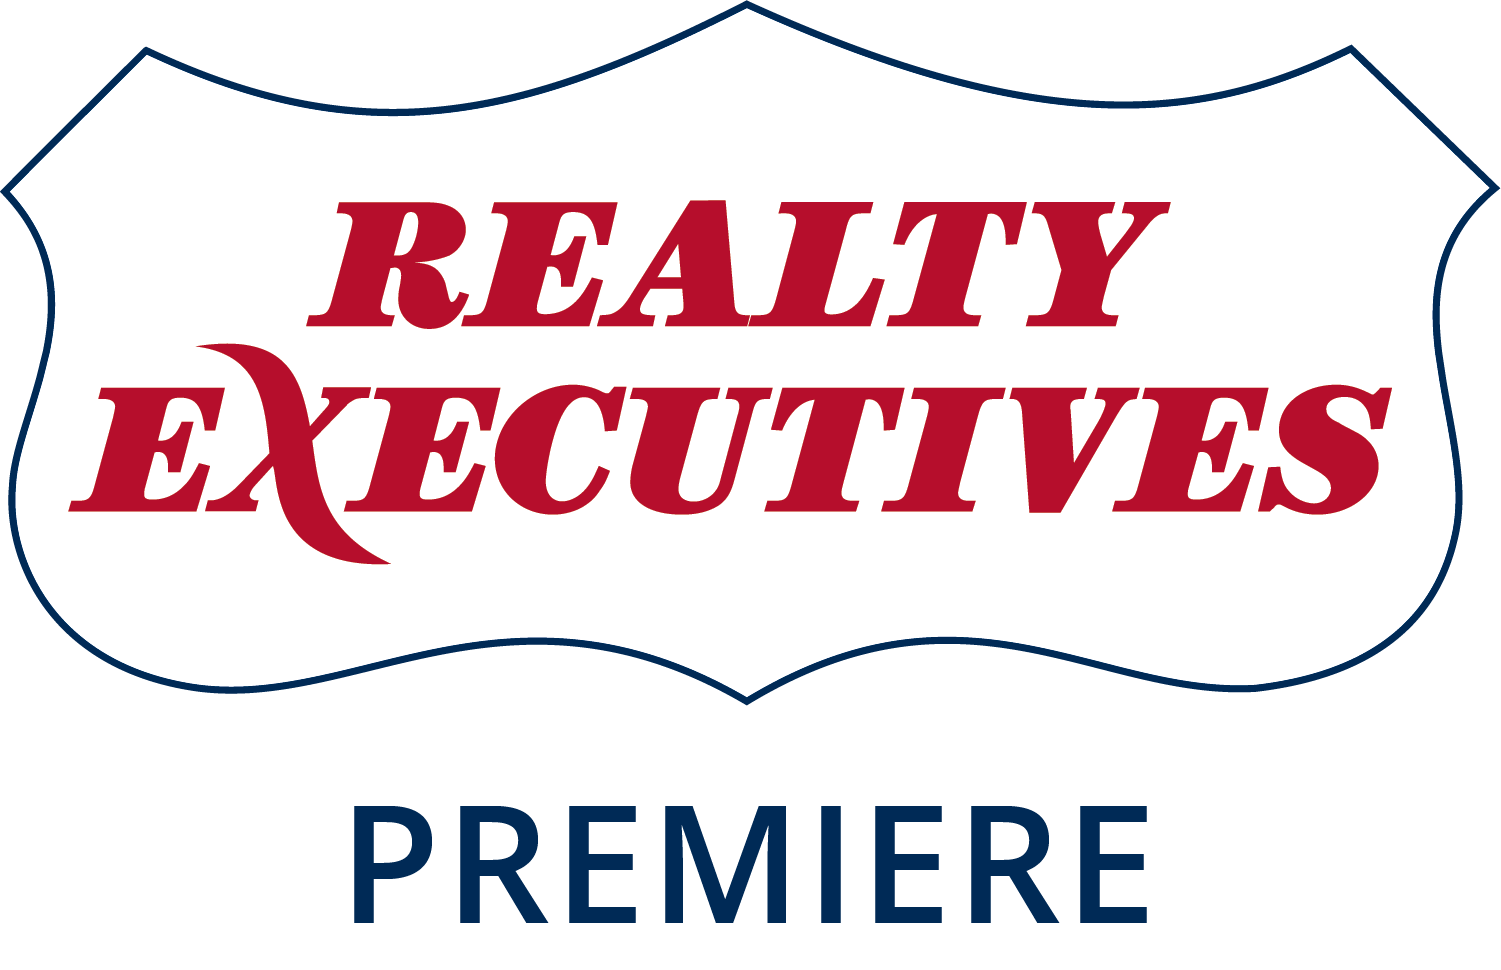 Realty Executives Premiere